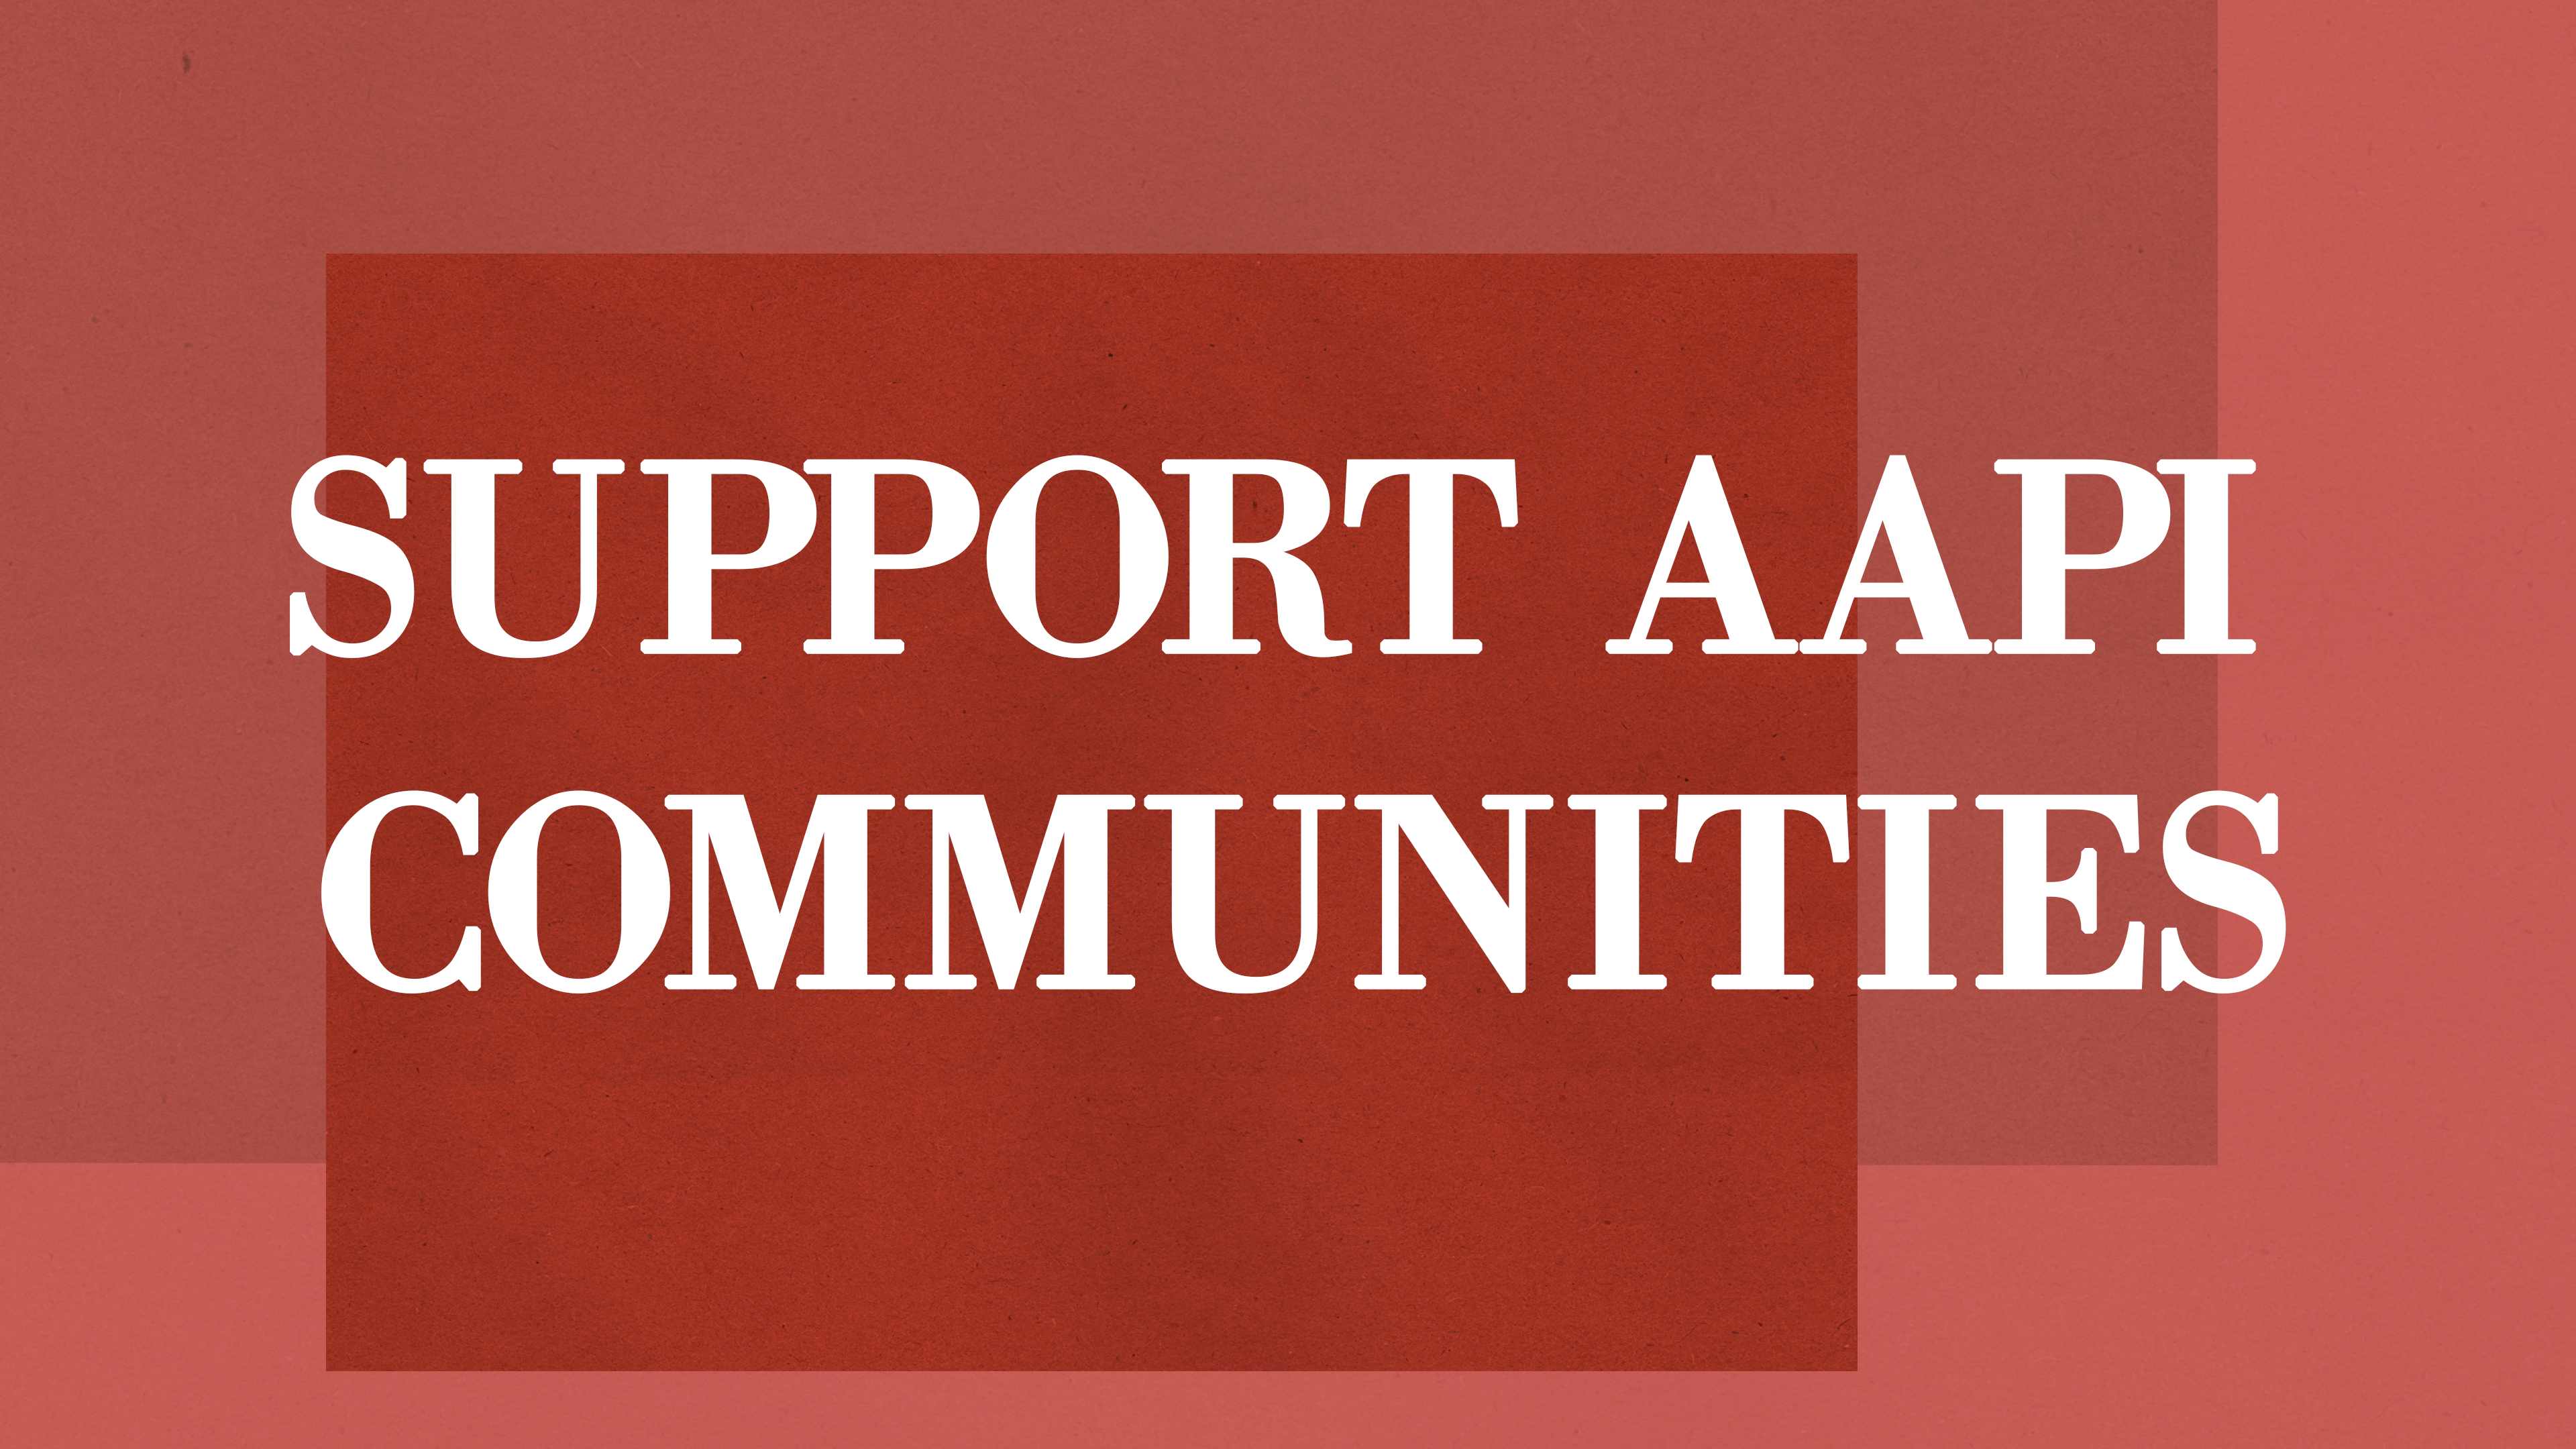 Graphic reads "Support AAPI Communities" on a red background.